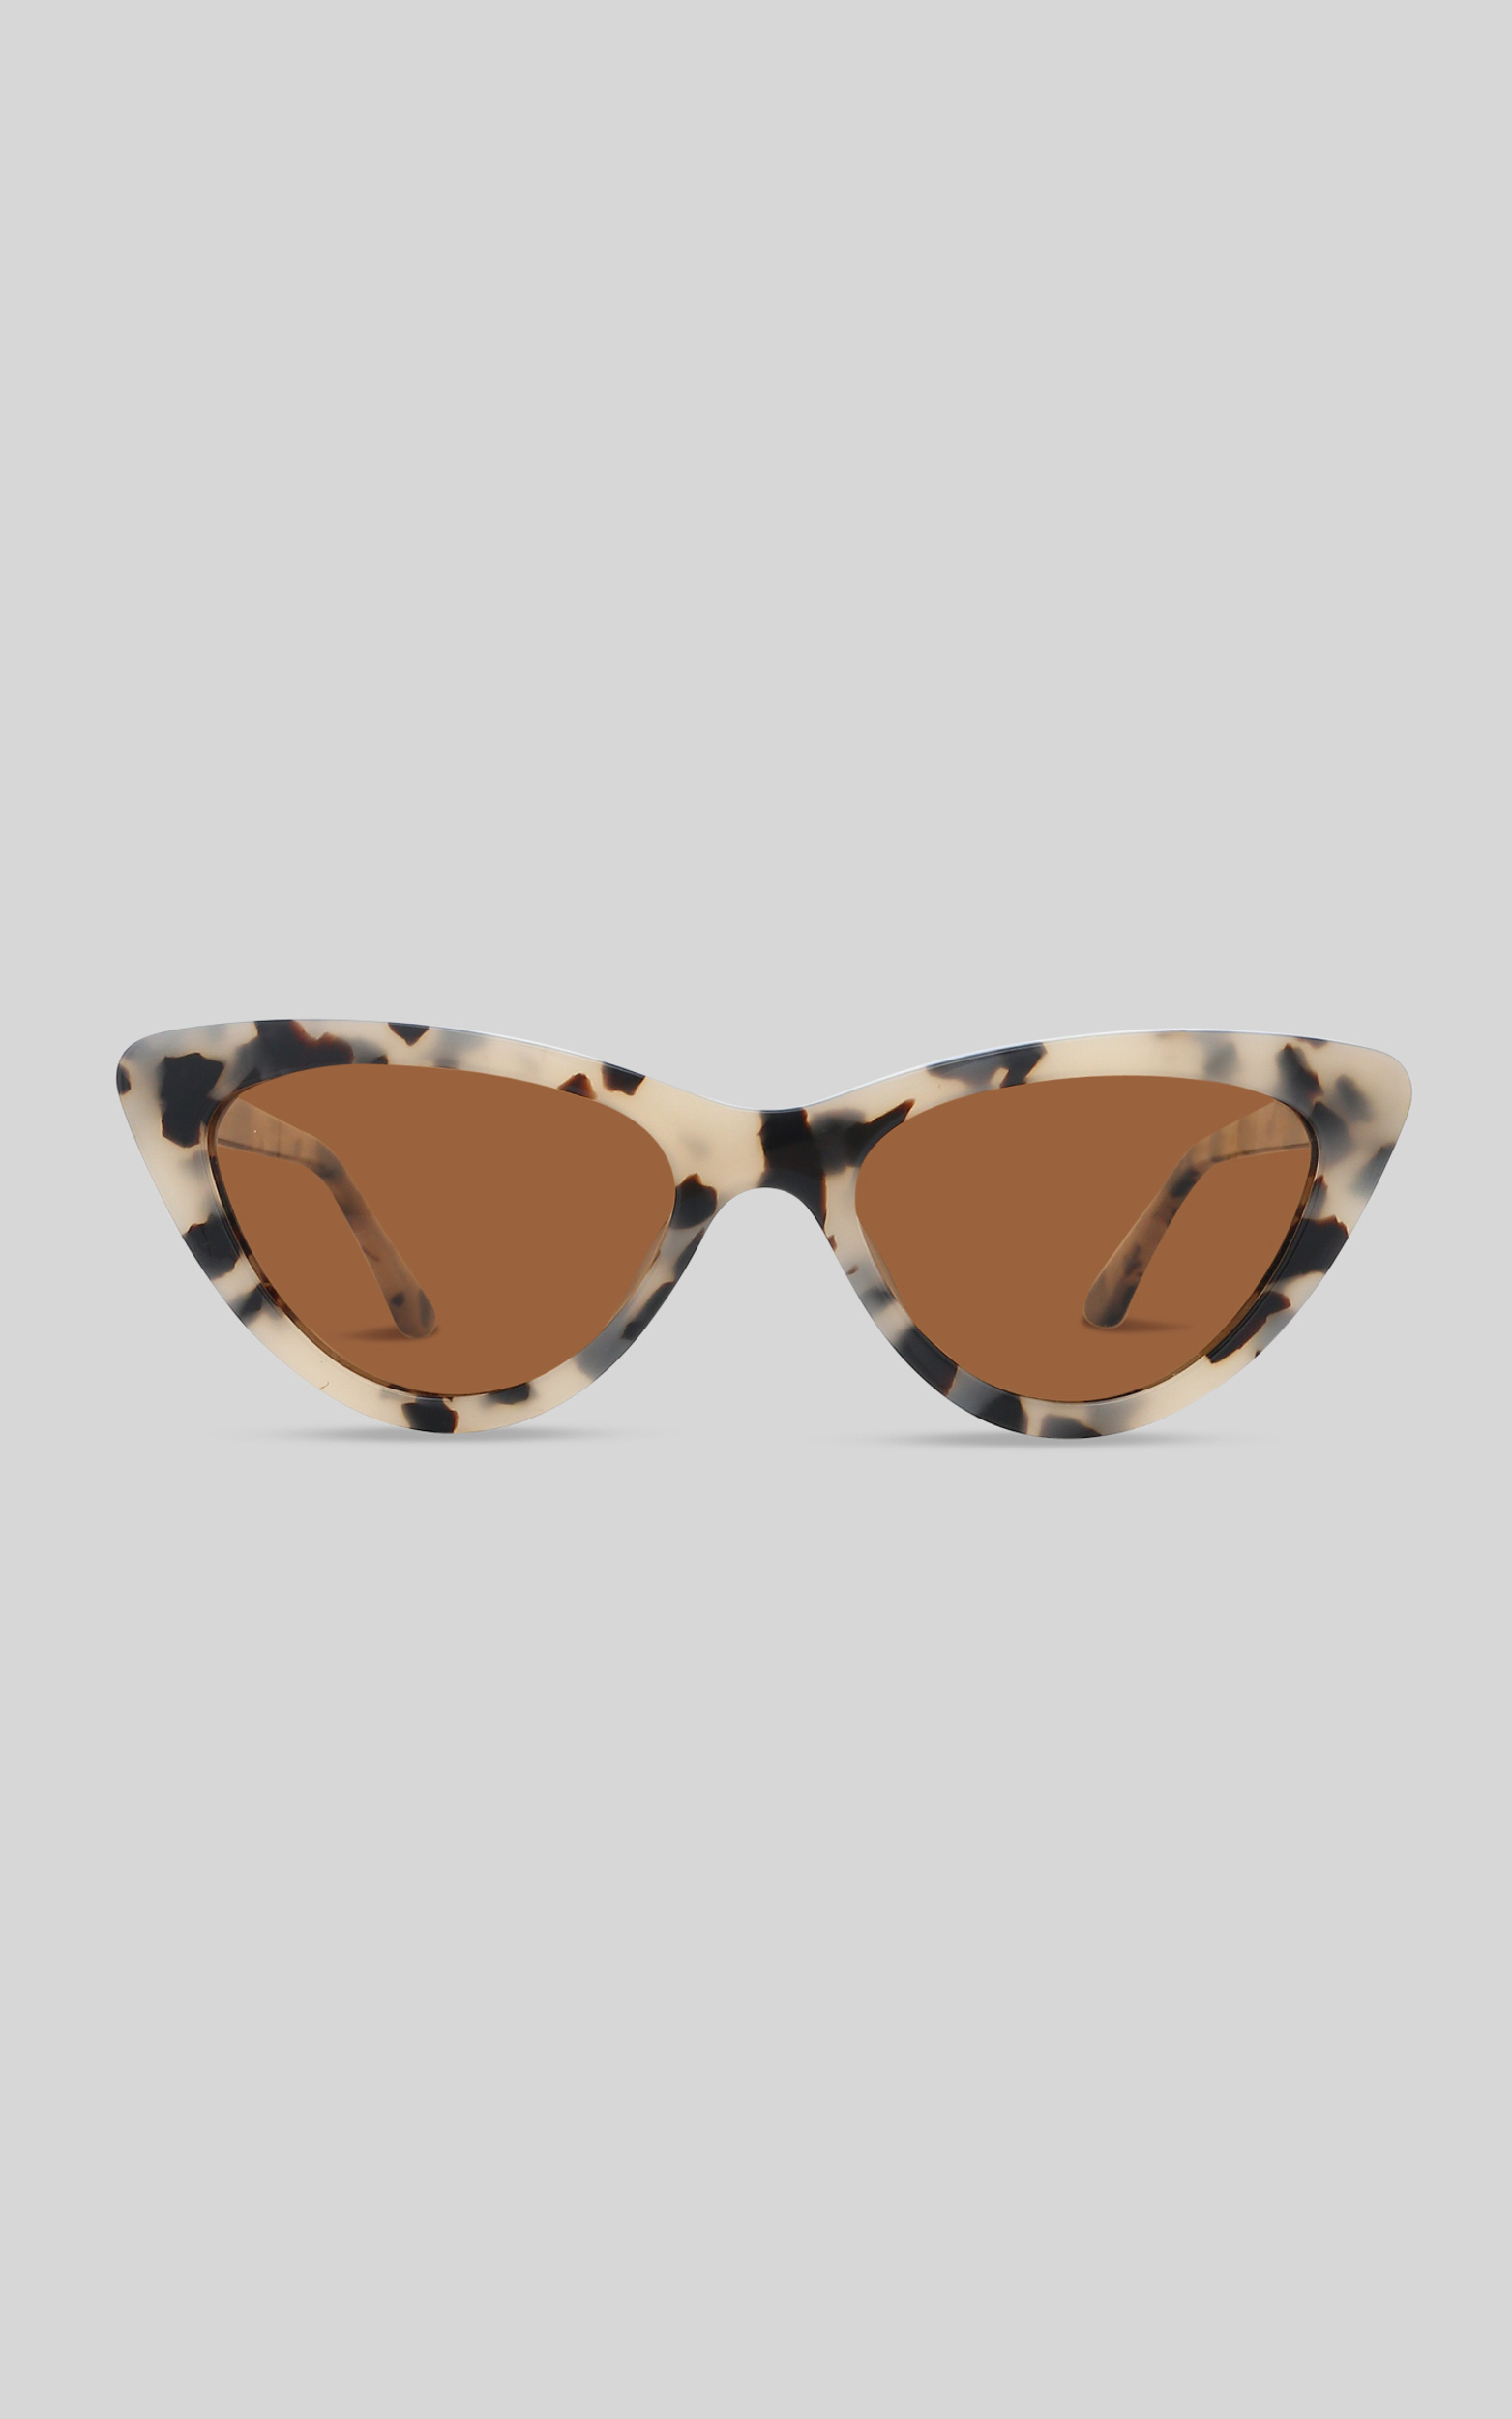 Banbe Eyewear - The Sofia Sunglasses in Blonde Tort-Brown - NoSize, NEU1, hi-res image number null